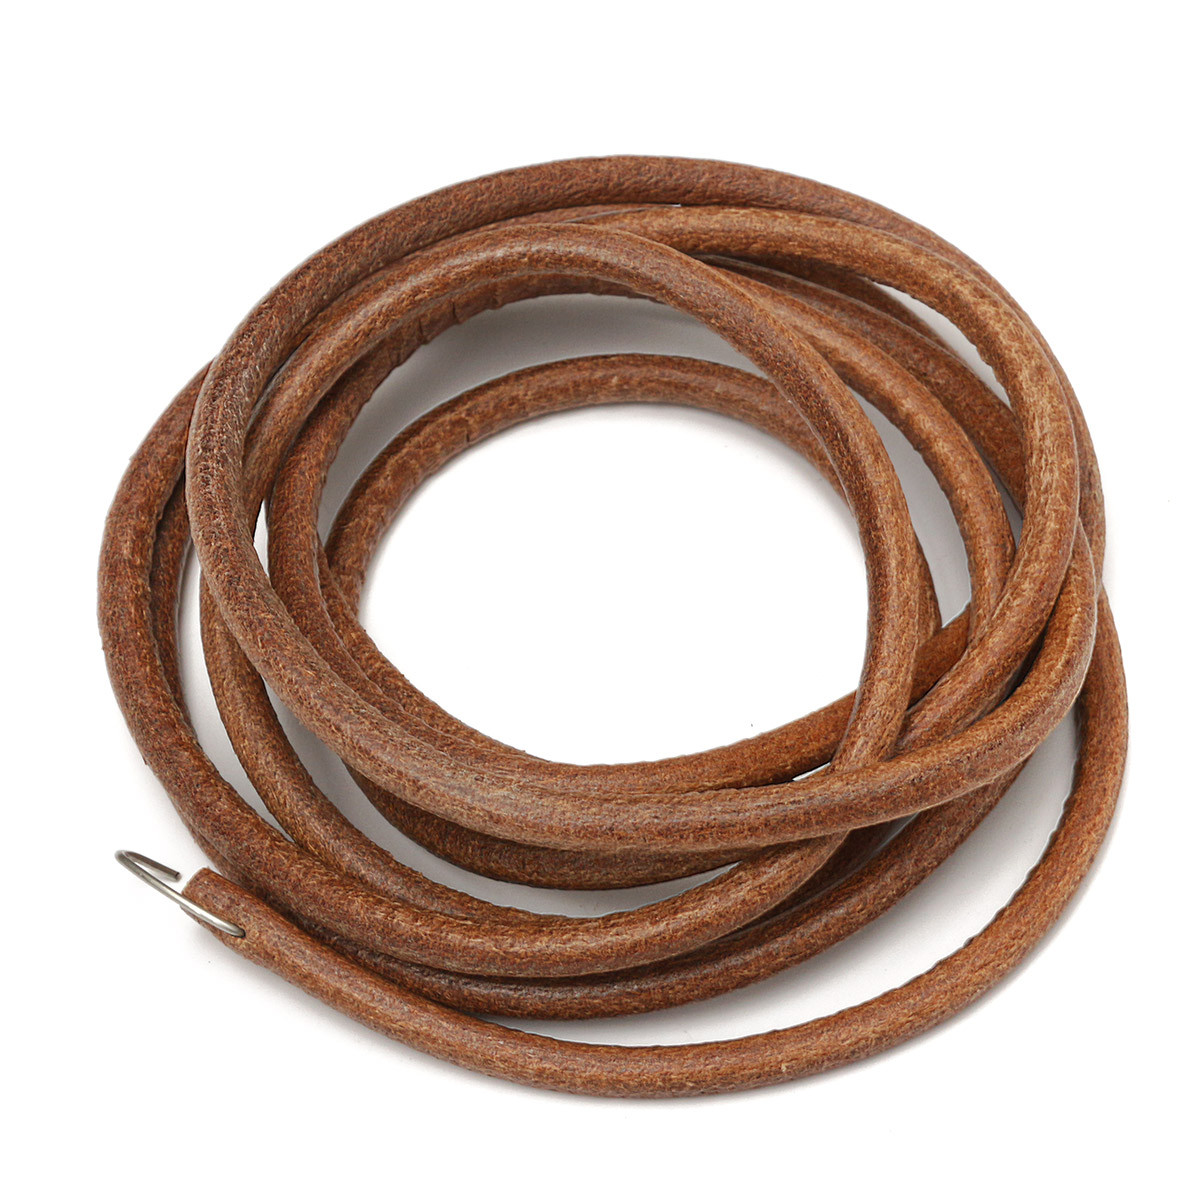 183cm-Leather-Belt-Treadle-Parts-With-Hook-For-Singer-Sewing-Machine-5mm-Diameter-1265373-1